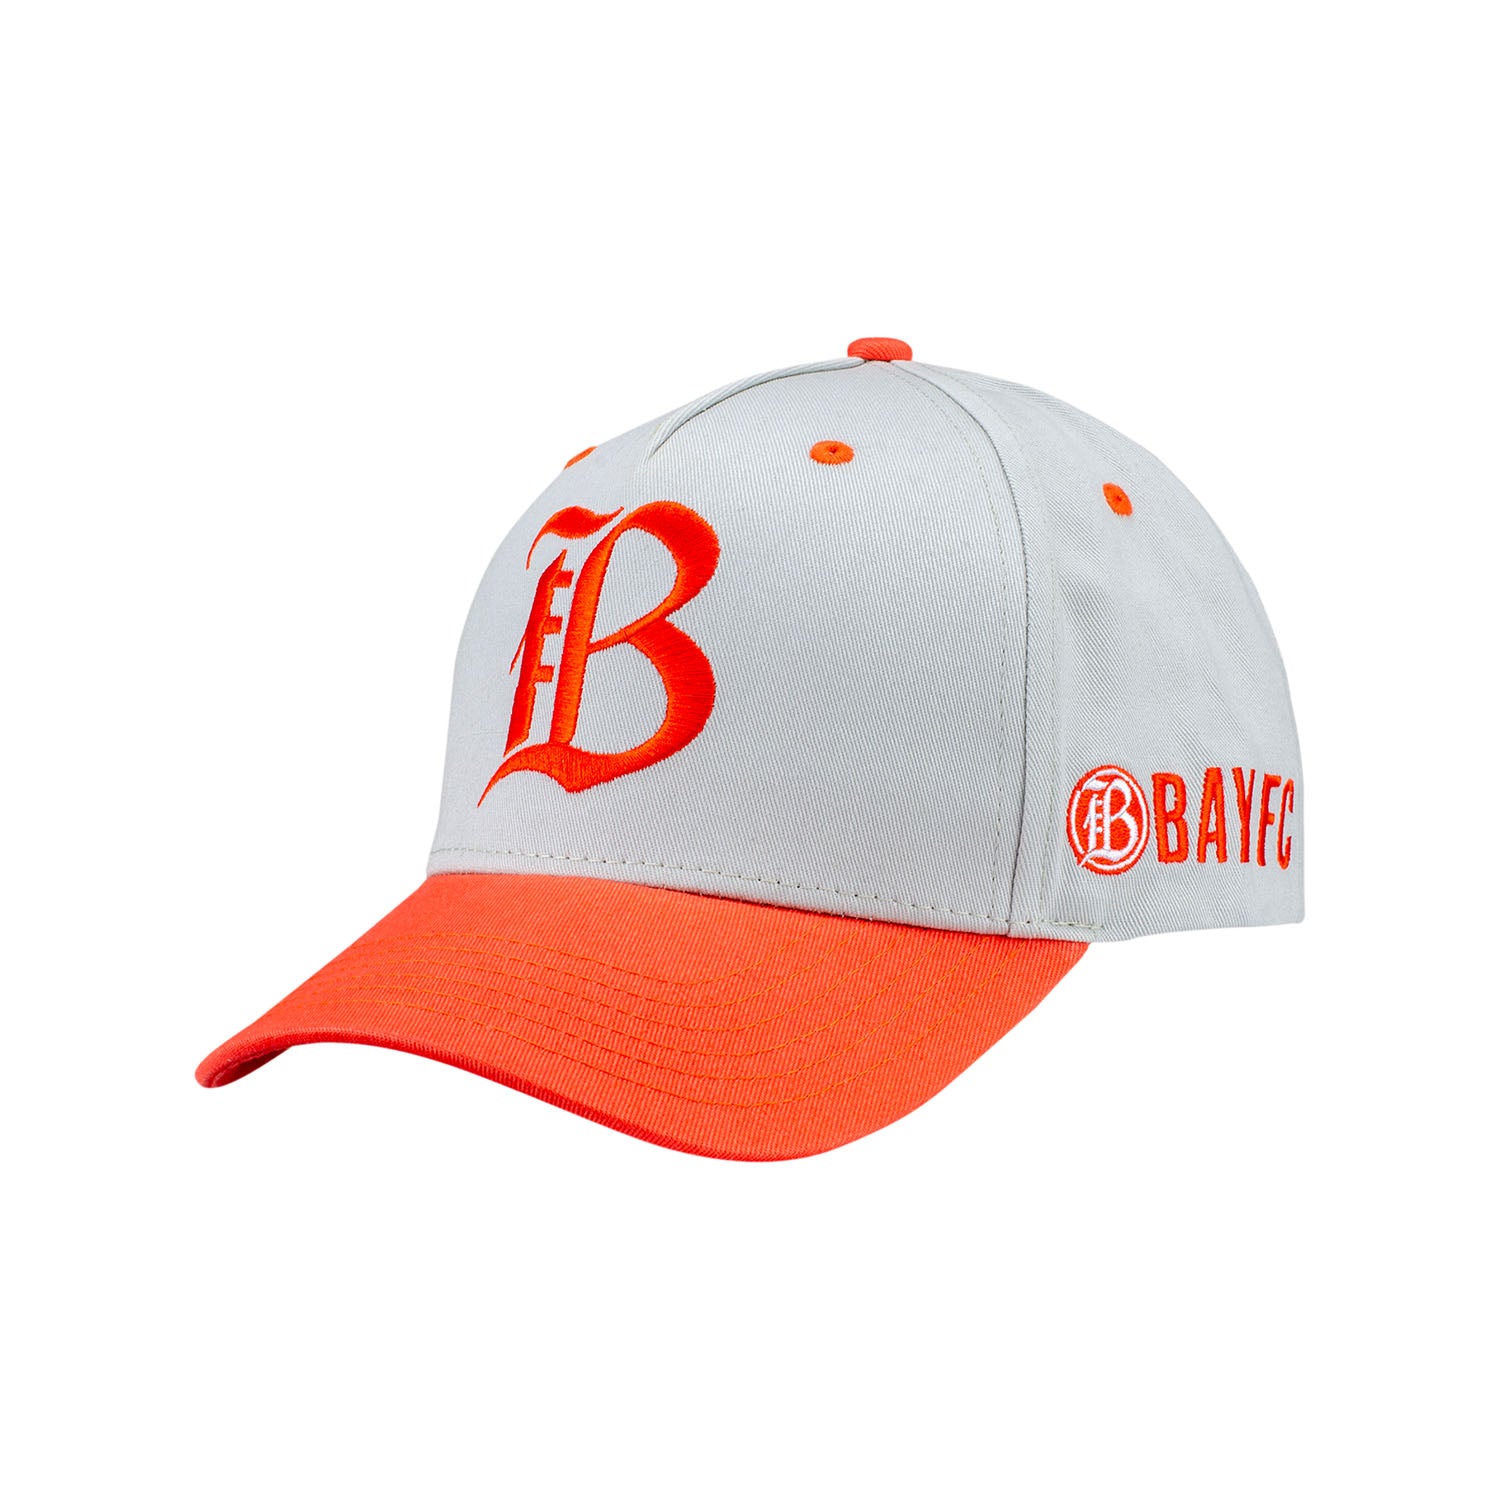 Adult Die Hard Bay FC Poppy Grey Hat - Angled Left Side View